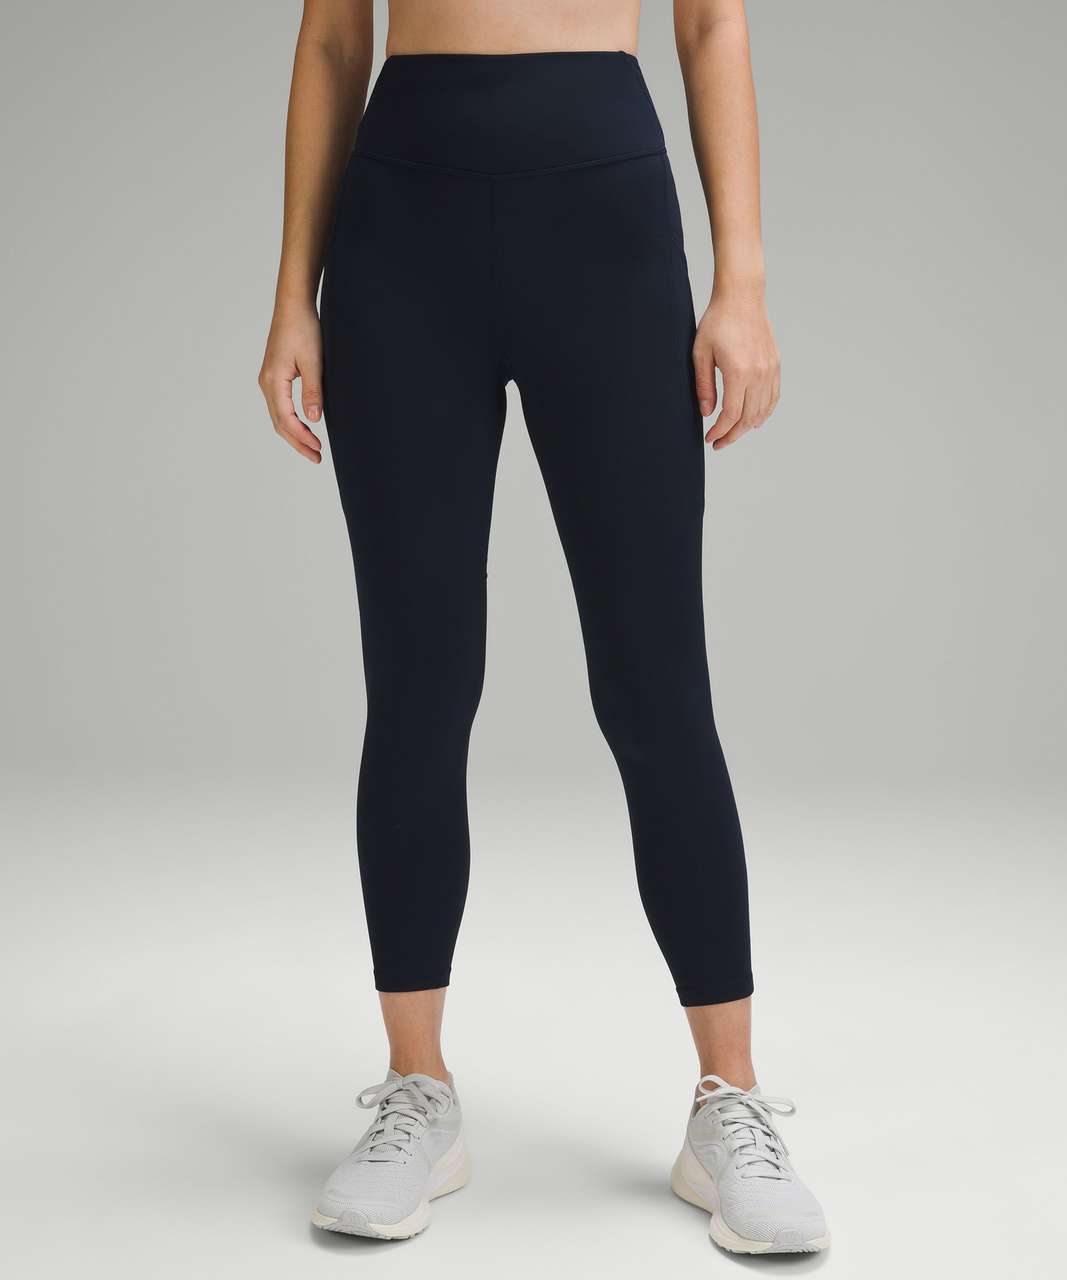 Lululemon Fast and Free High-Rise Fleece Tight 25" *Pockets - True Navy